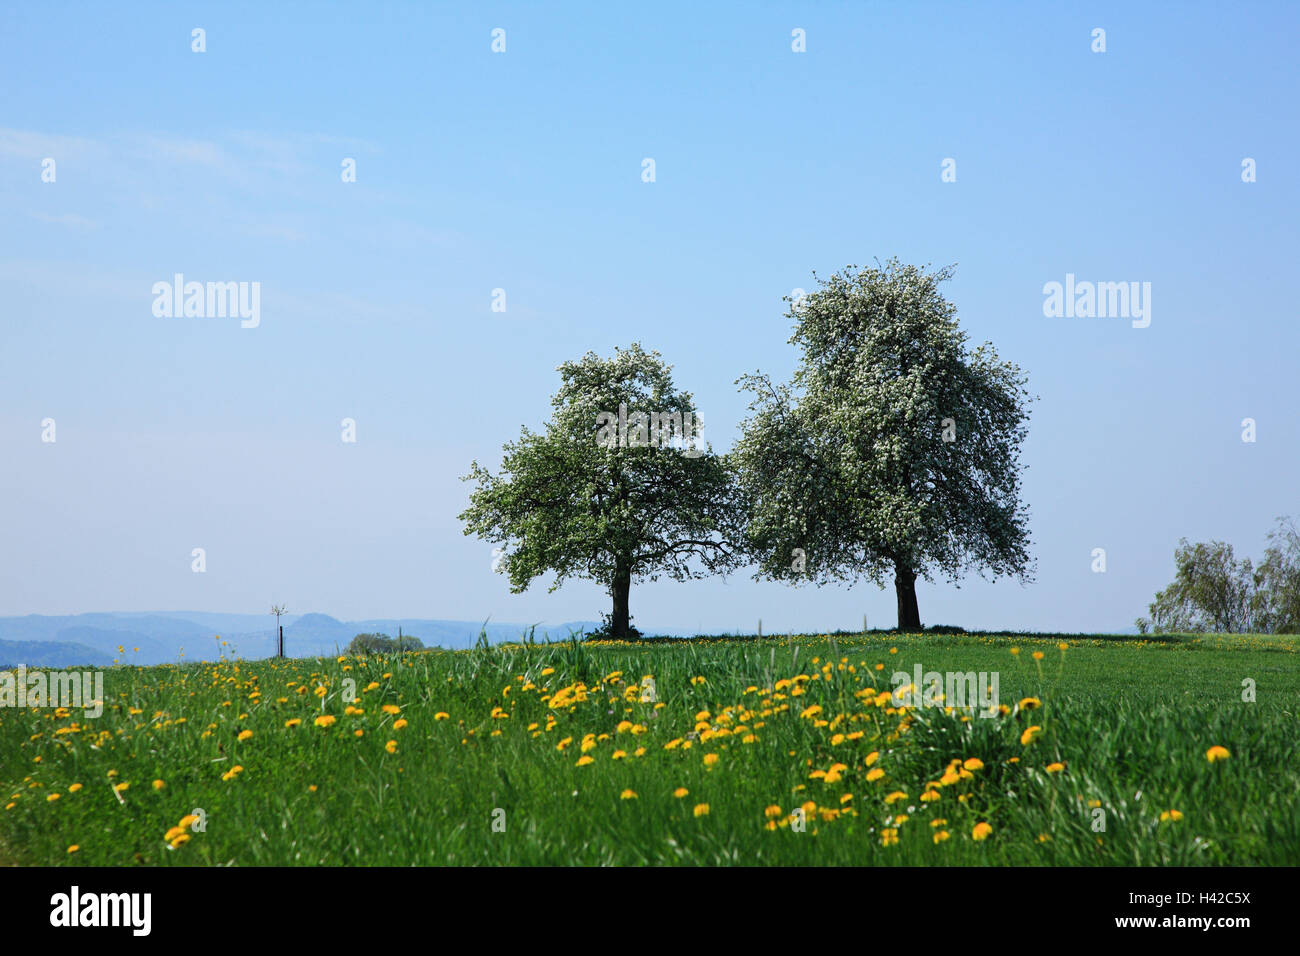 Switzerland, canton Zurich, meadow, trees, two, Stock Photo